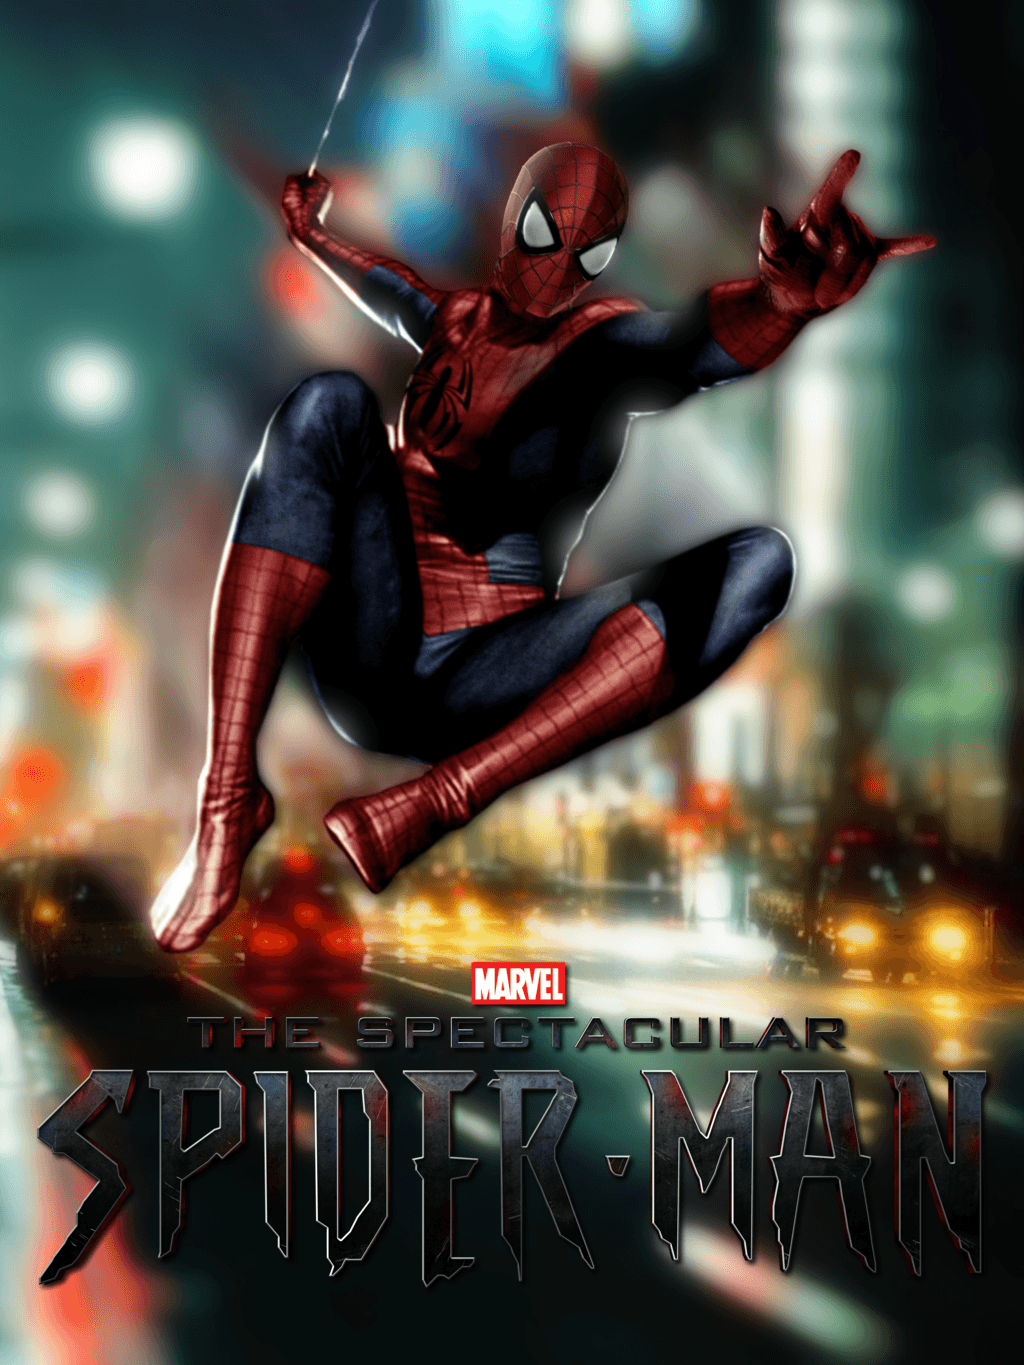 Marvel&;s THE SPECTACULAR SPIDER MAN